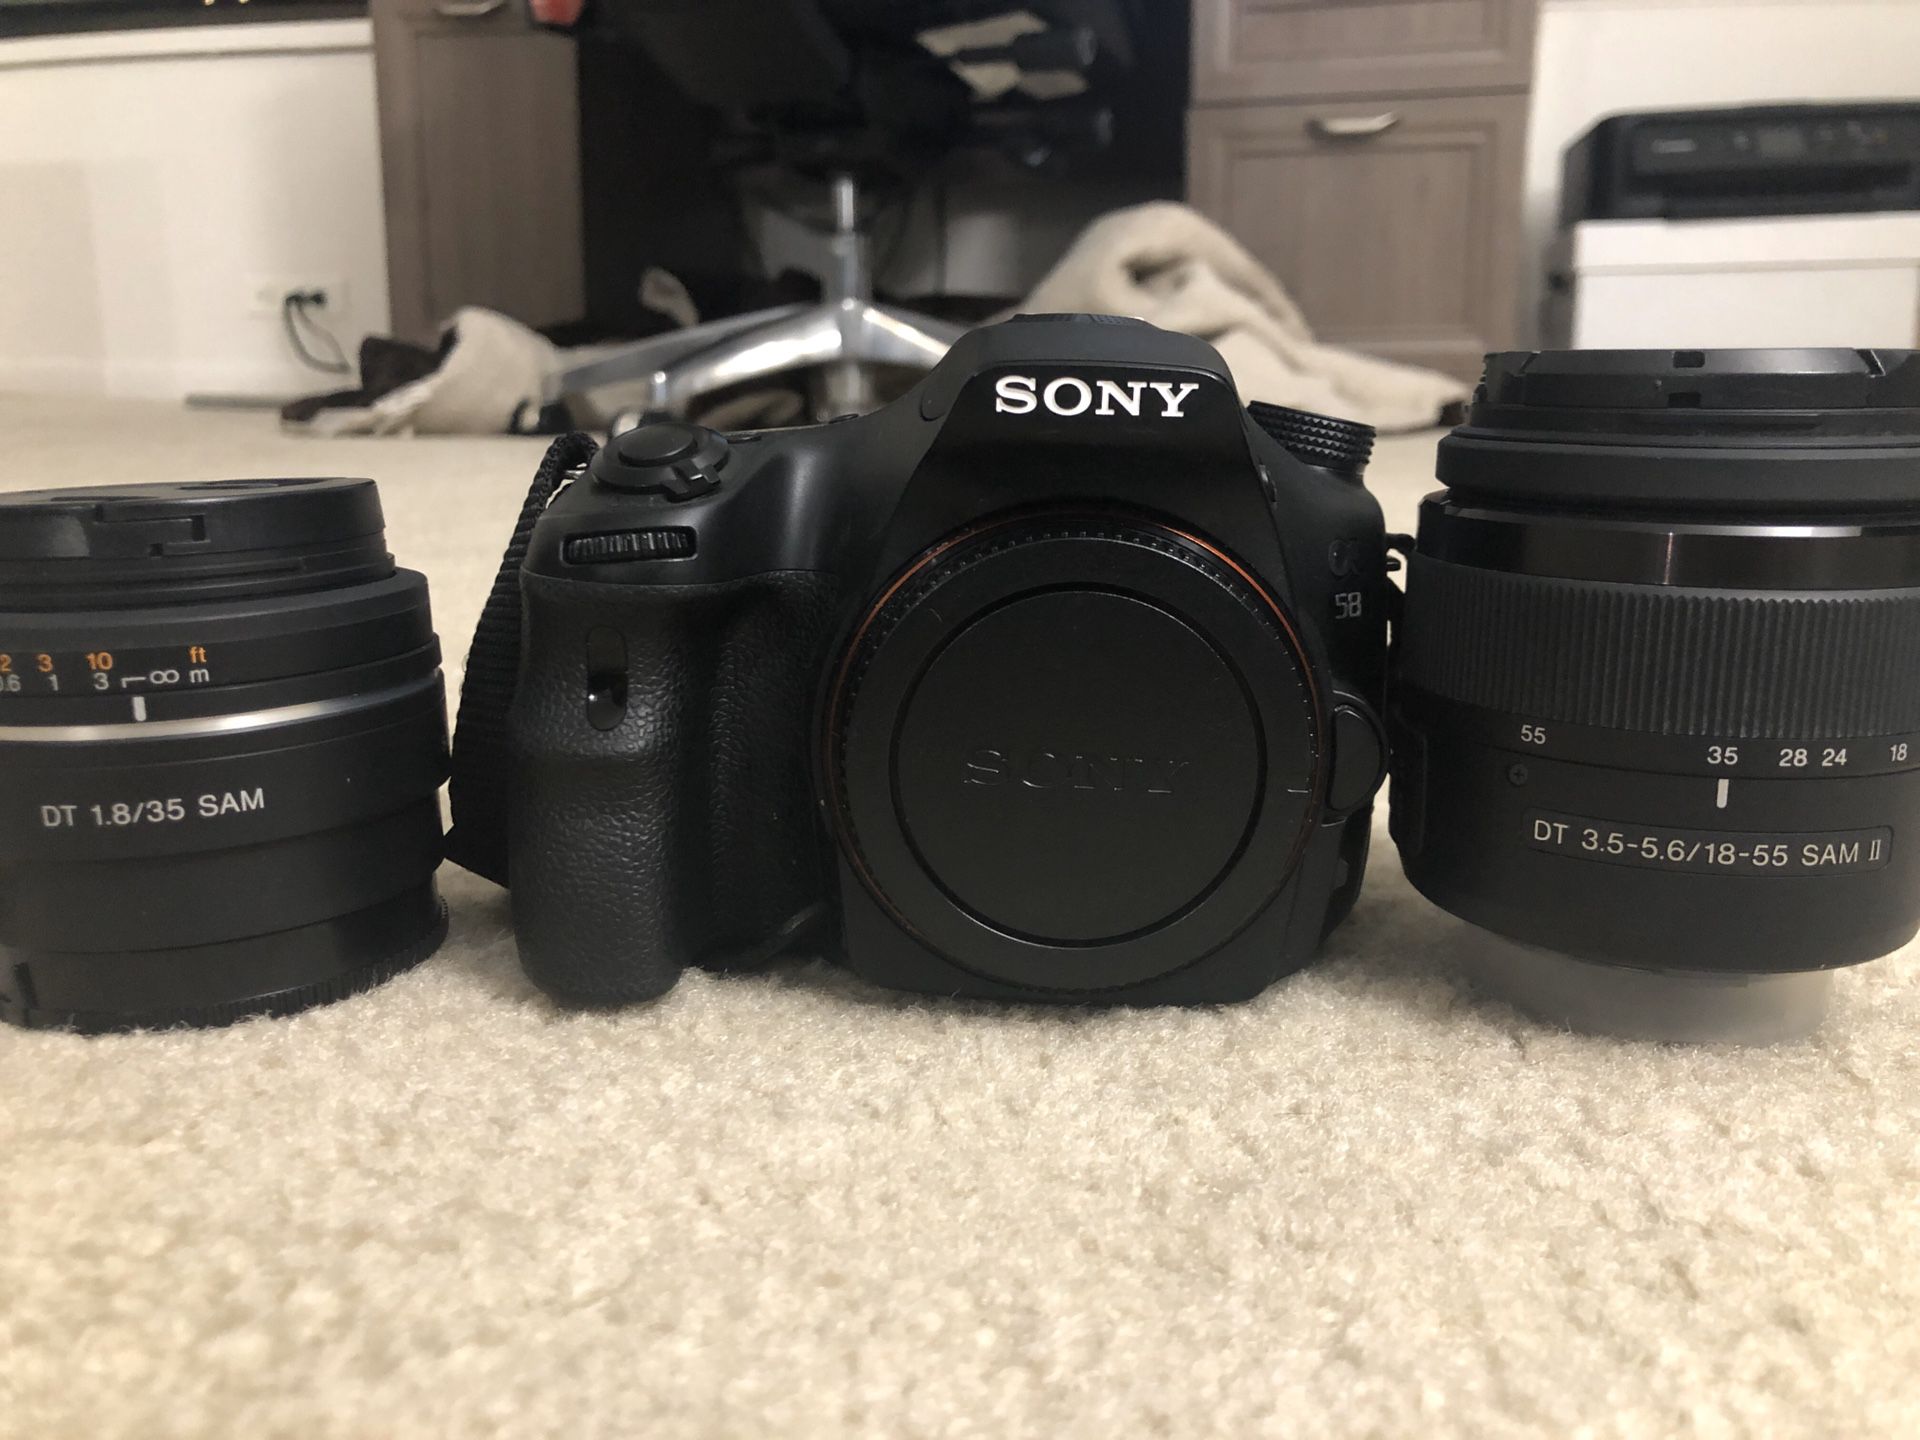 Sony A58 SLR camera with lenses